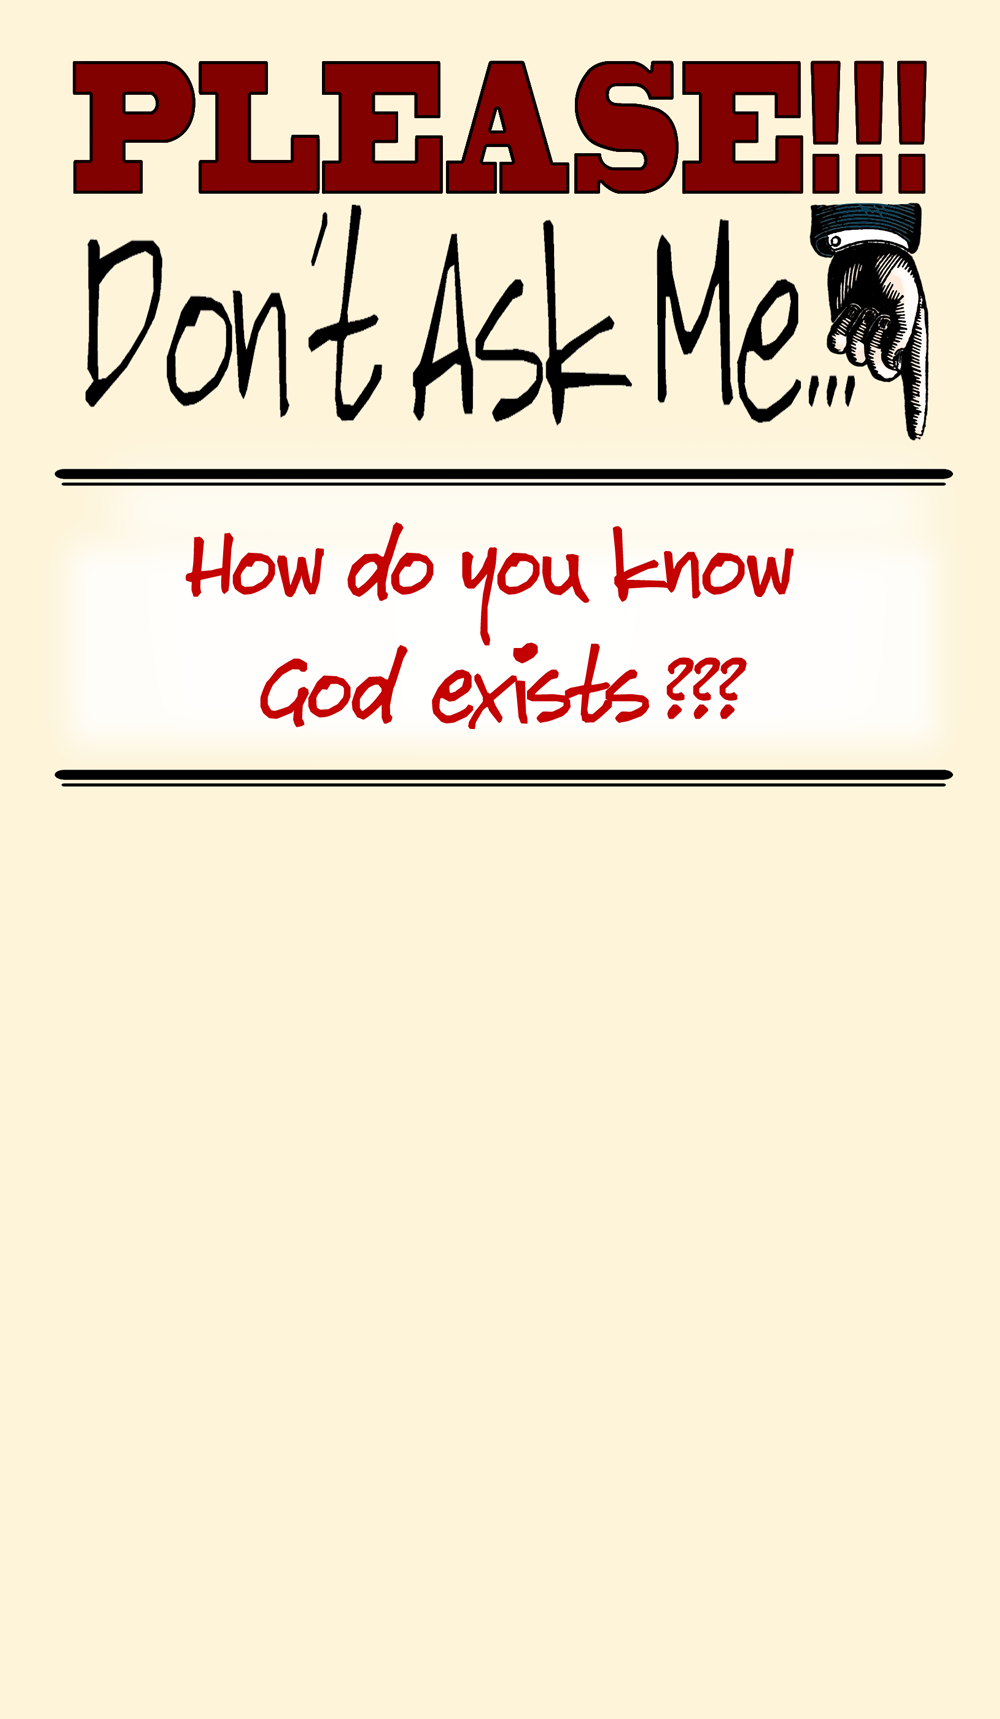 Please don’t ask me…How do you know God exist especially since we can’t see, hear or touch Him?